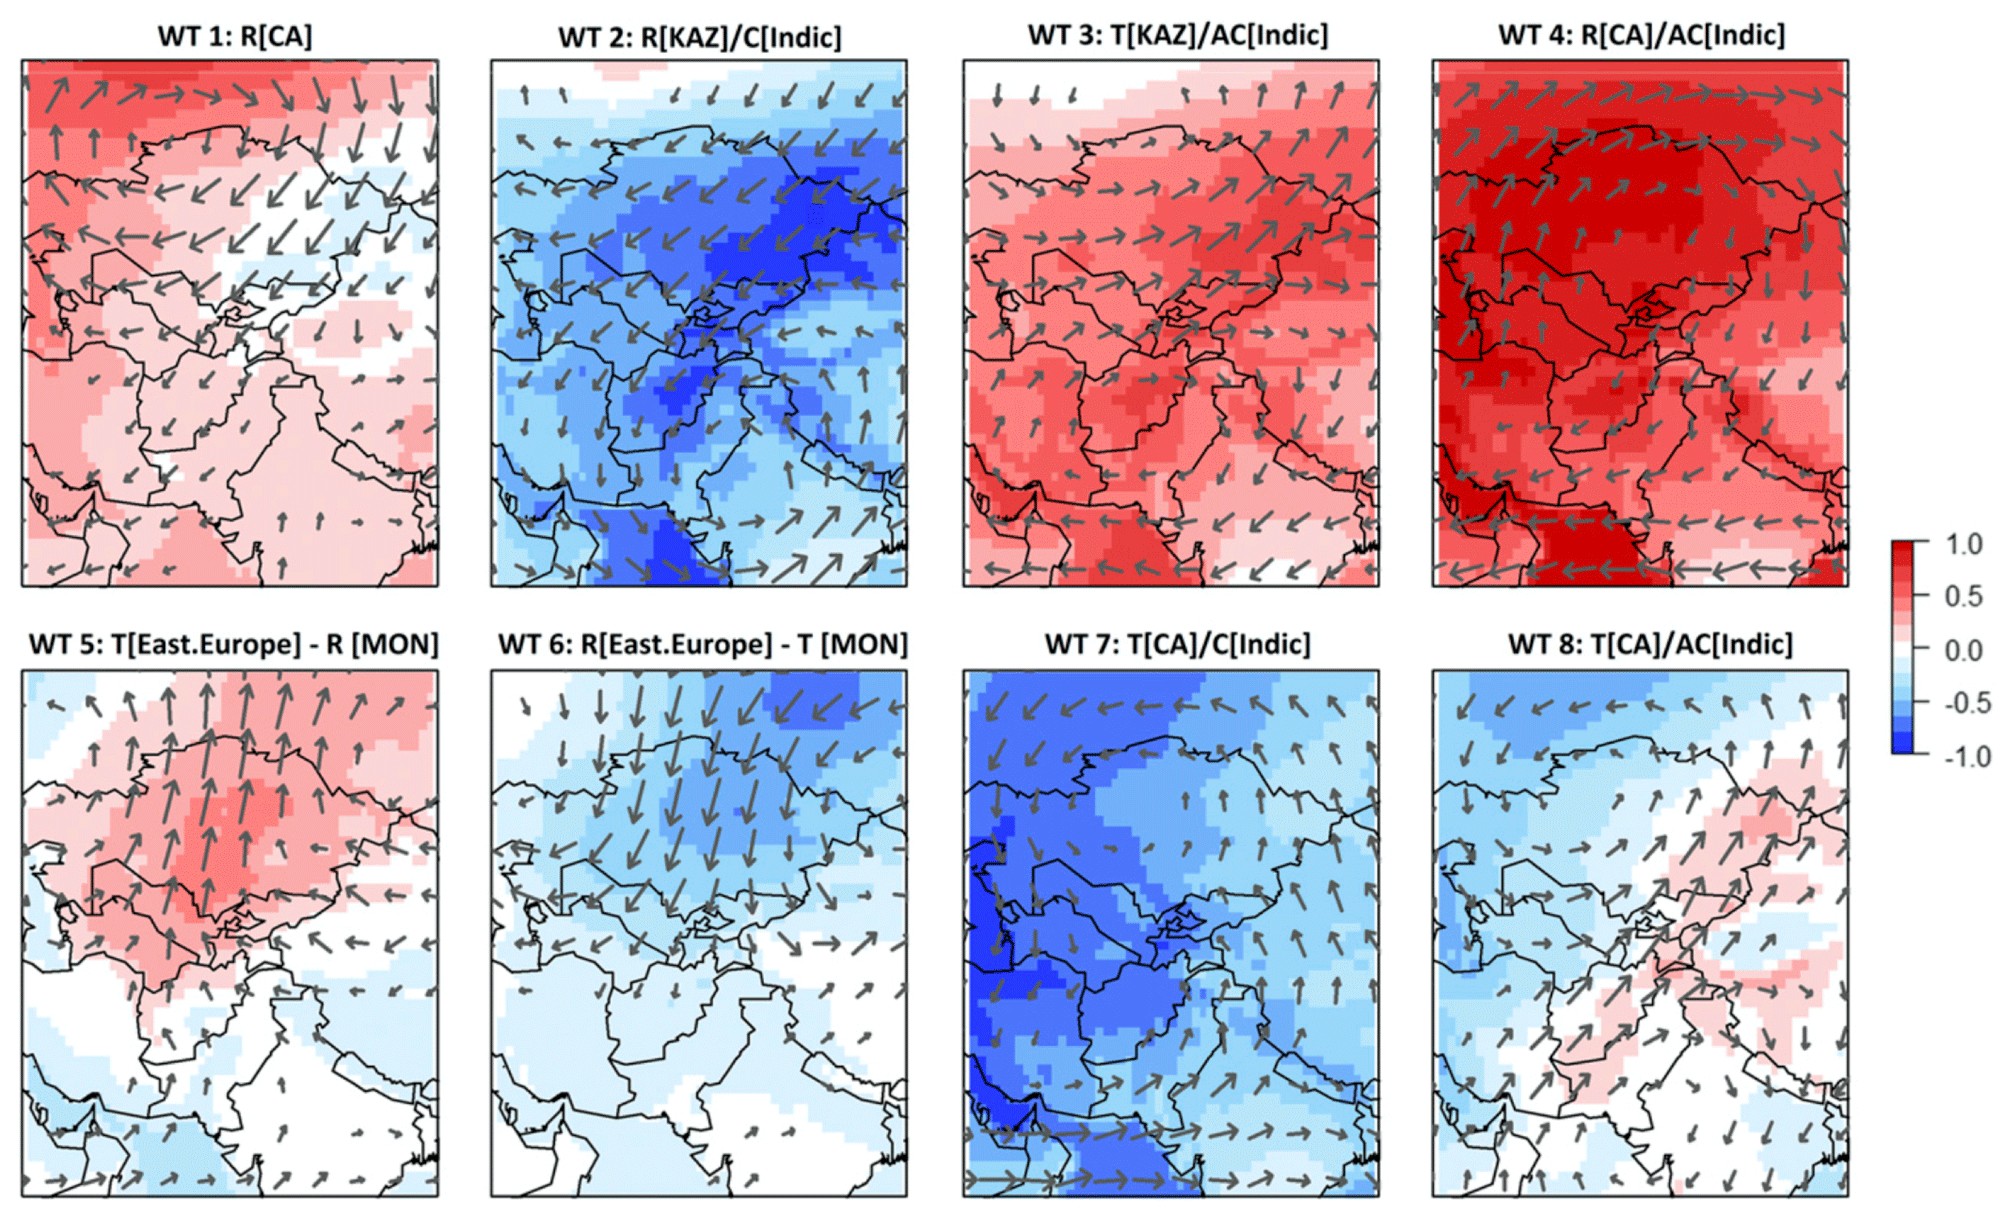 Composite maps illustrating the averaged anomalies of ERA-Interim/Land 6-hourly temperature for each weather type (WT 1 - WT 8). Values are depicted in standard deviations for each grid cell, respectively. Arrows indicate anomalies of the 500-hPa ERA-Interim wind field [@gerlitz_2018].